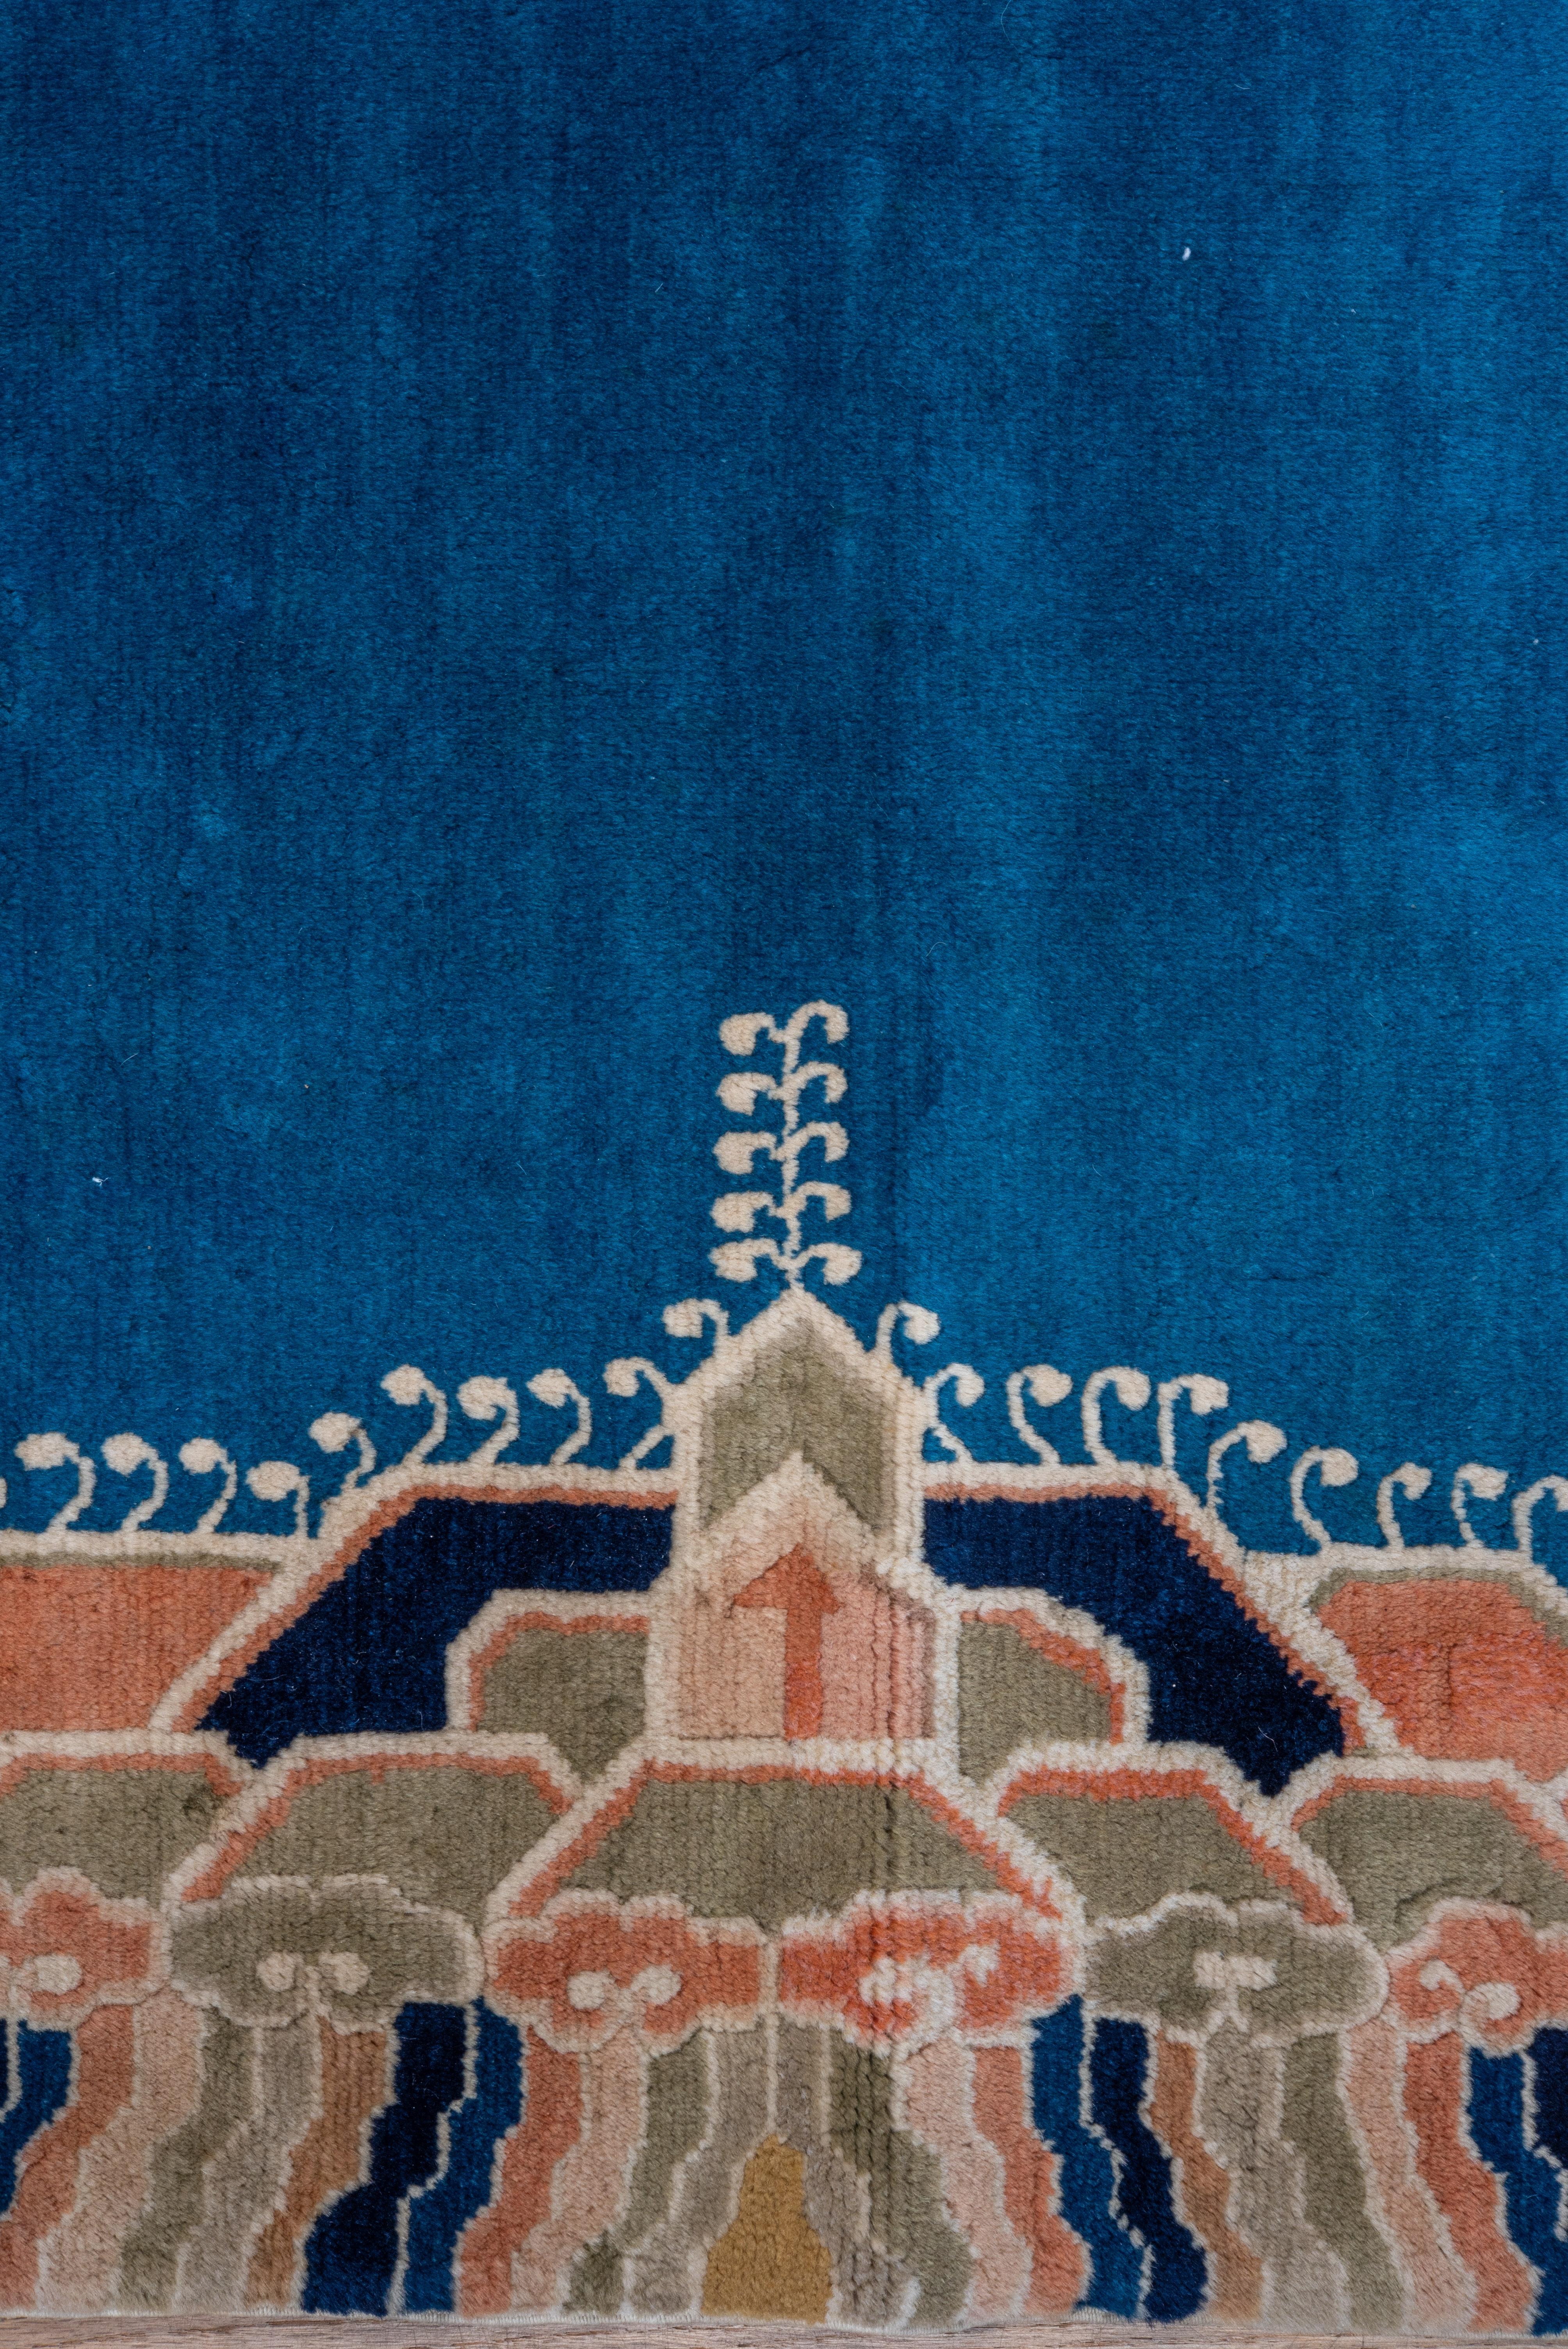 The cerulean blue field displays four writhing semi-profile scaly corner dragons and a matching central creature, full-face, above layered and pointed mountains at the cardinal points, and a surround in the polychrome Yun-tsao Tou style (clouds and